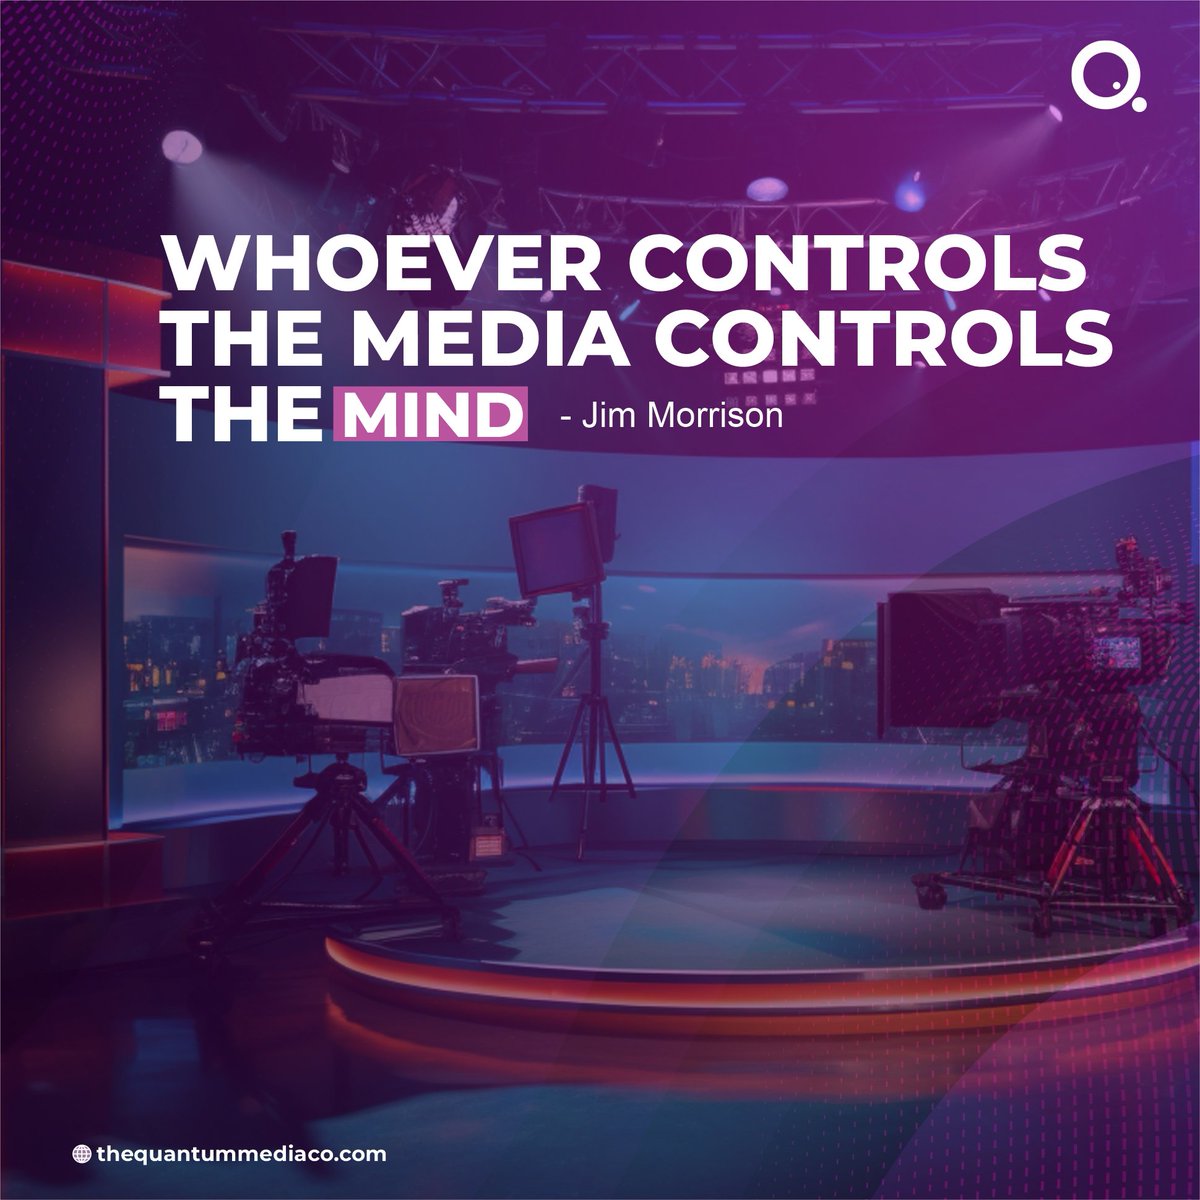 Jim Morrison highlights the significant influence media holds over our perceptions and thoughts.
.
.
.
#quantumexpressionsmedia #mediaconsultant #digitalmarketing #branding #producer